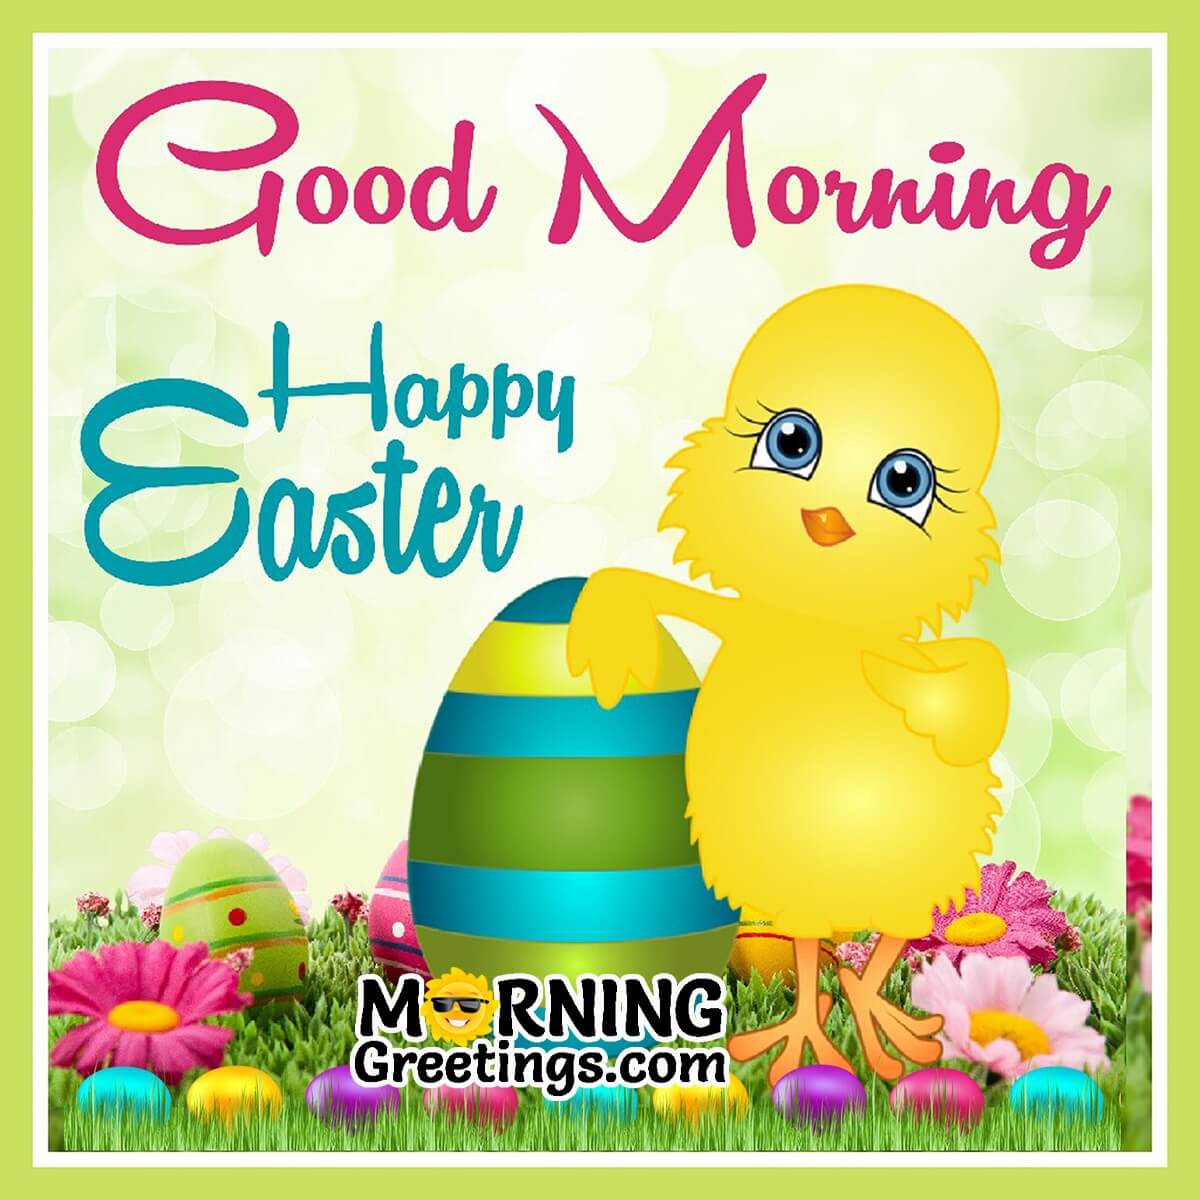 Good Morning Happy Easter Card